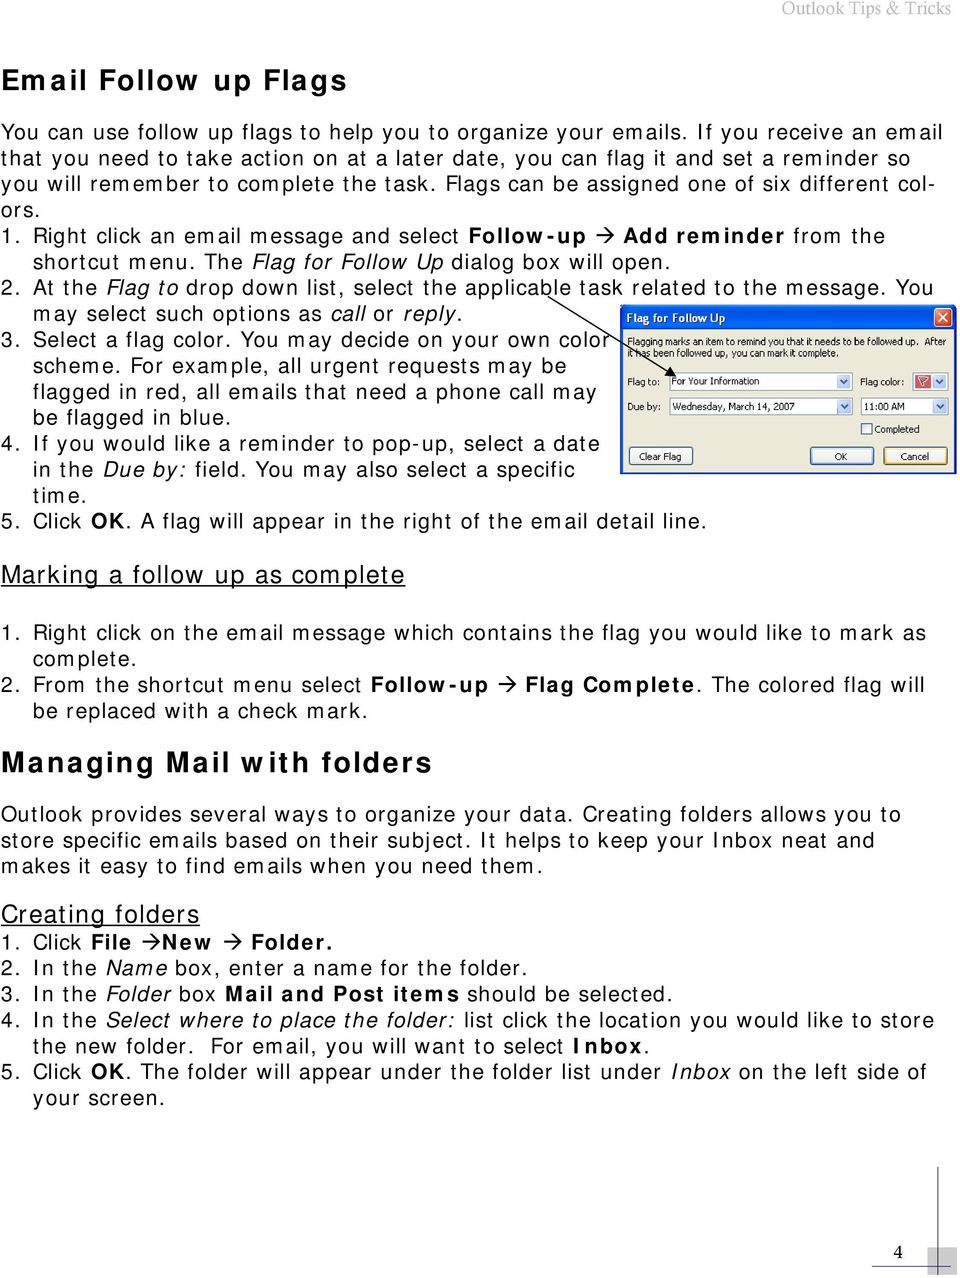 Flags can be assigned one of six different colors. 1. Right click an email message and select Follow-up Add reminder from the shortcut menu. The Flag for Follow Up dialog box will open. 2.